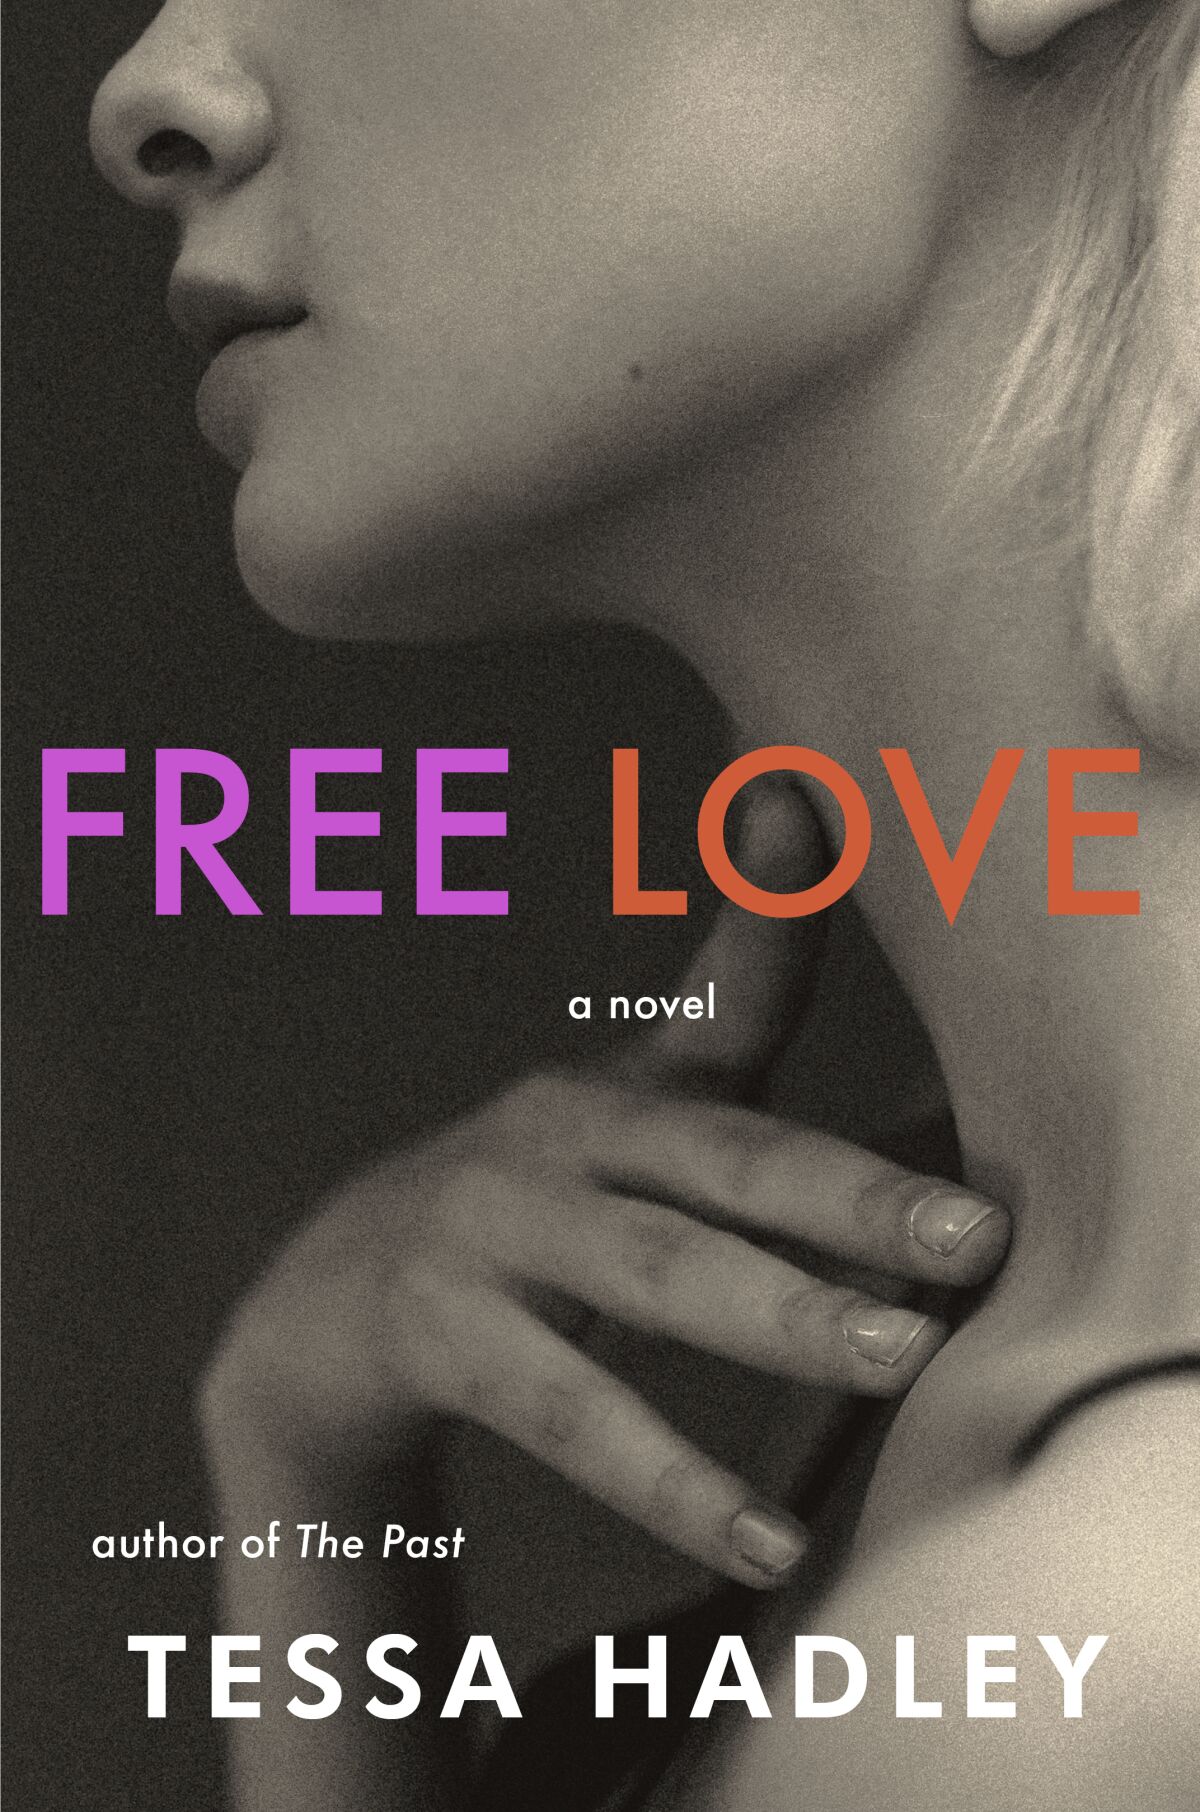 This book cover image released by HarperCollins shows "Free Love" by Tessa Hadley. (HarperCollins via AP)